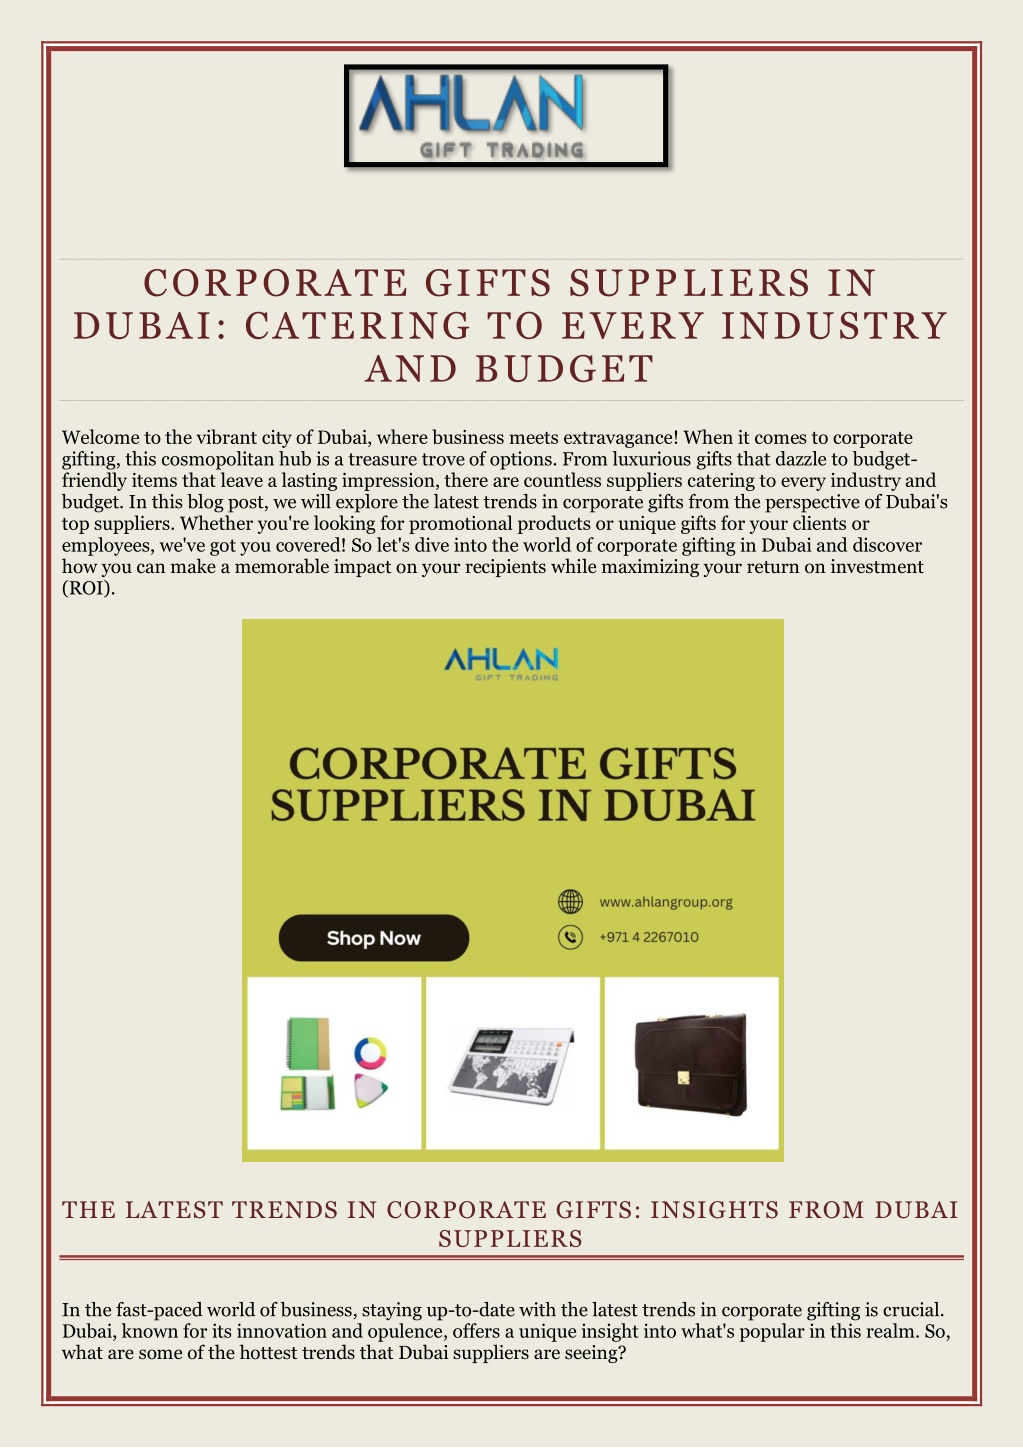 Corporate Gifts for Travel Industry